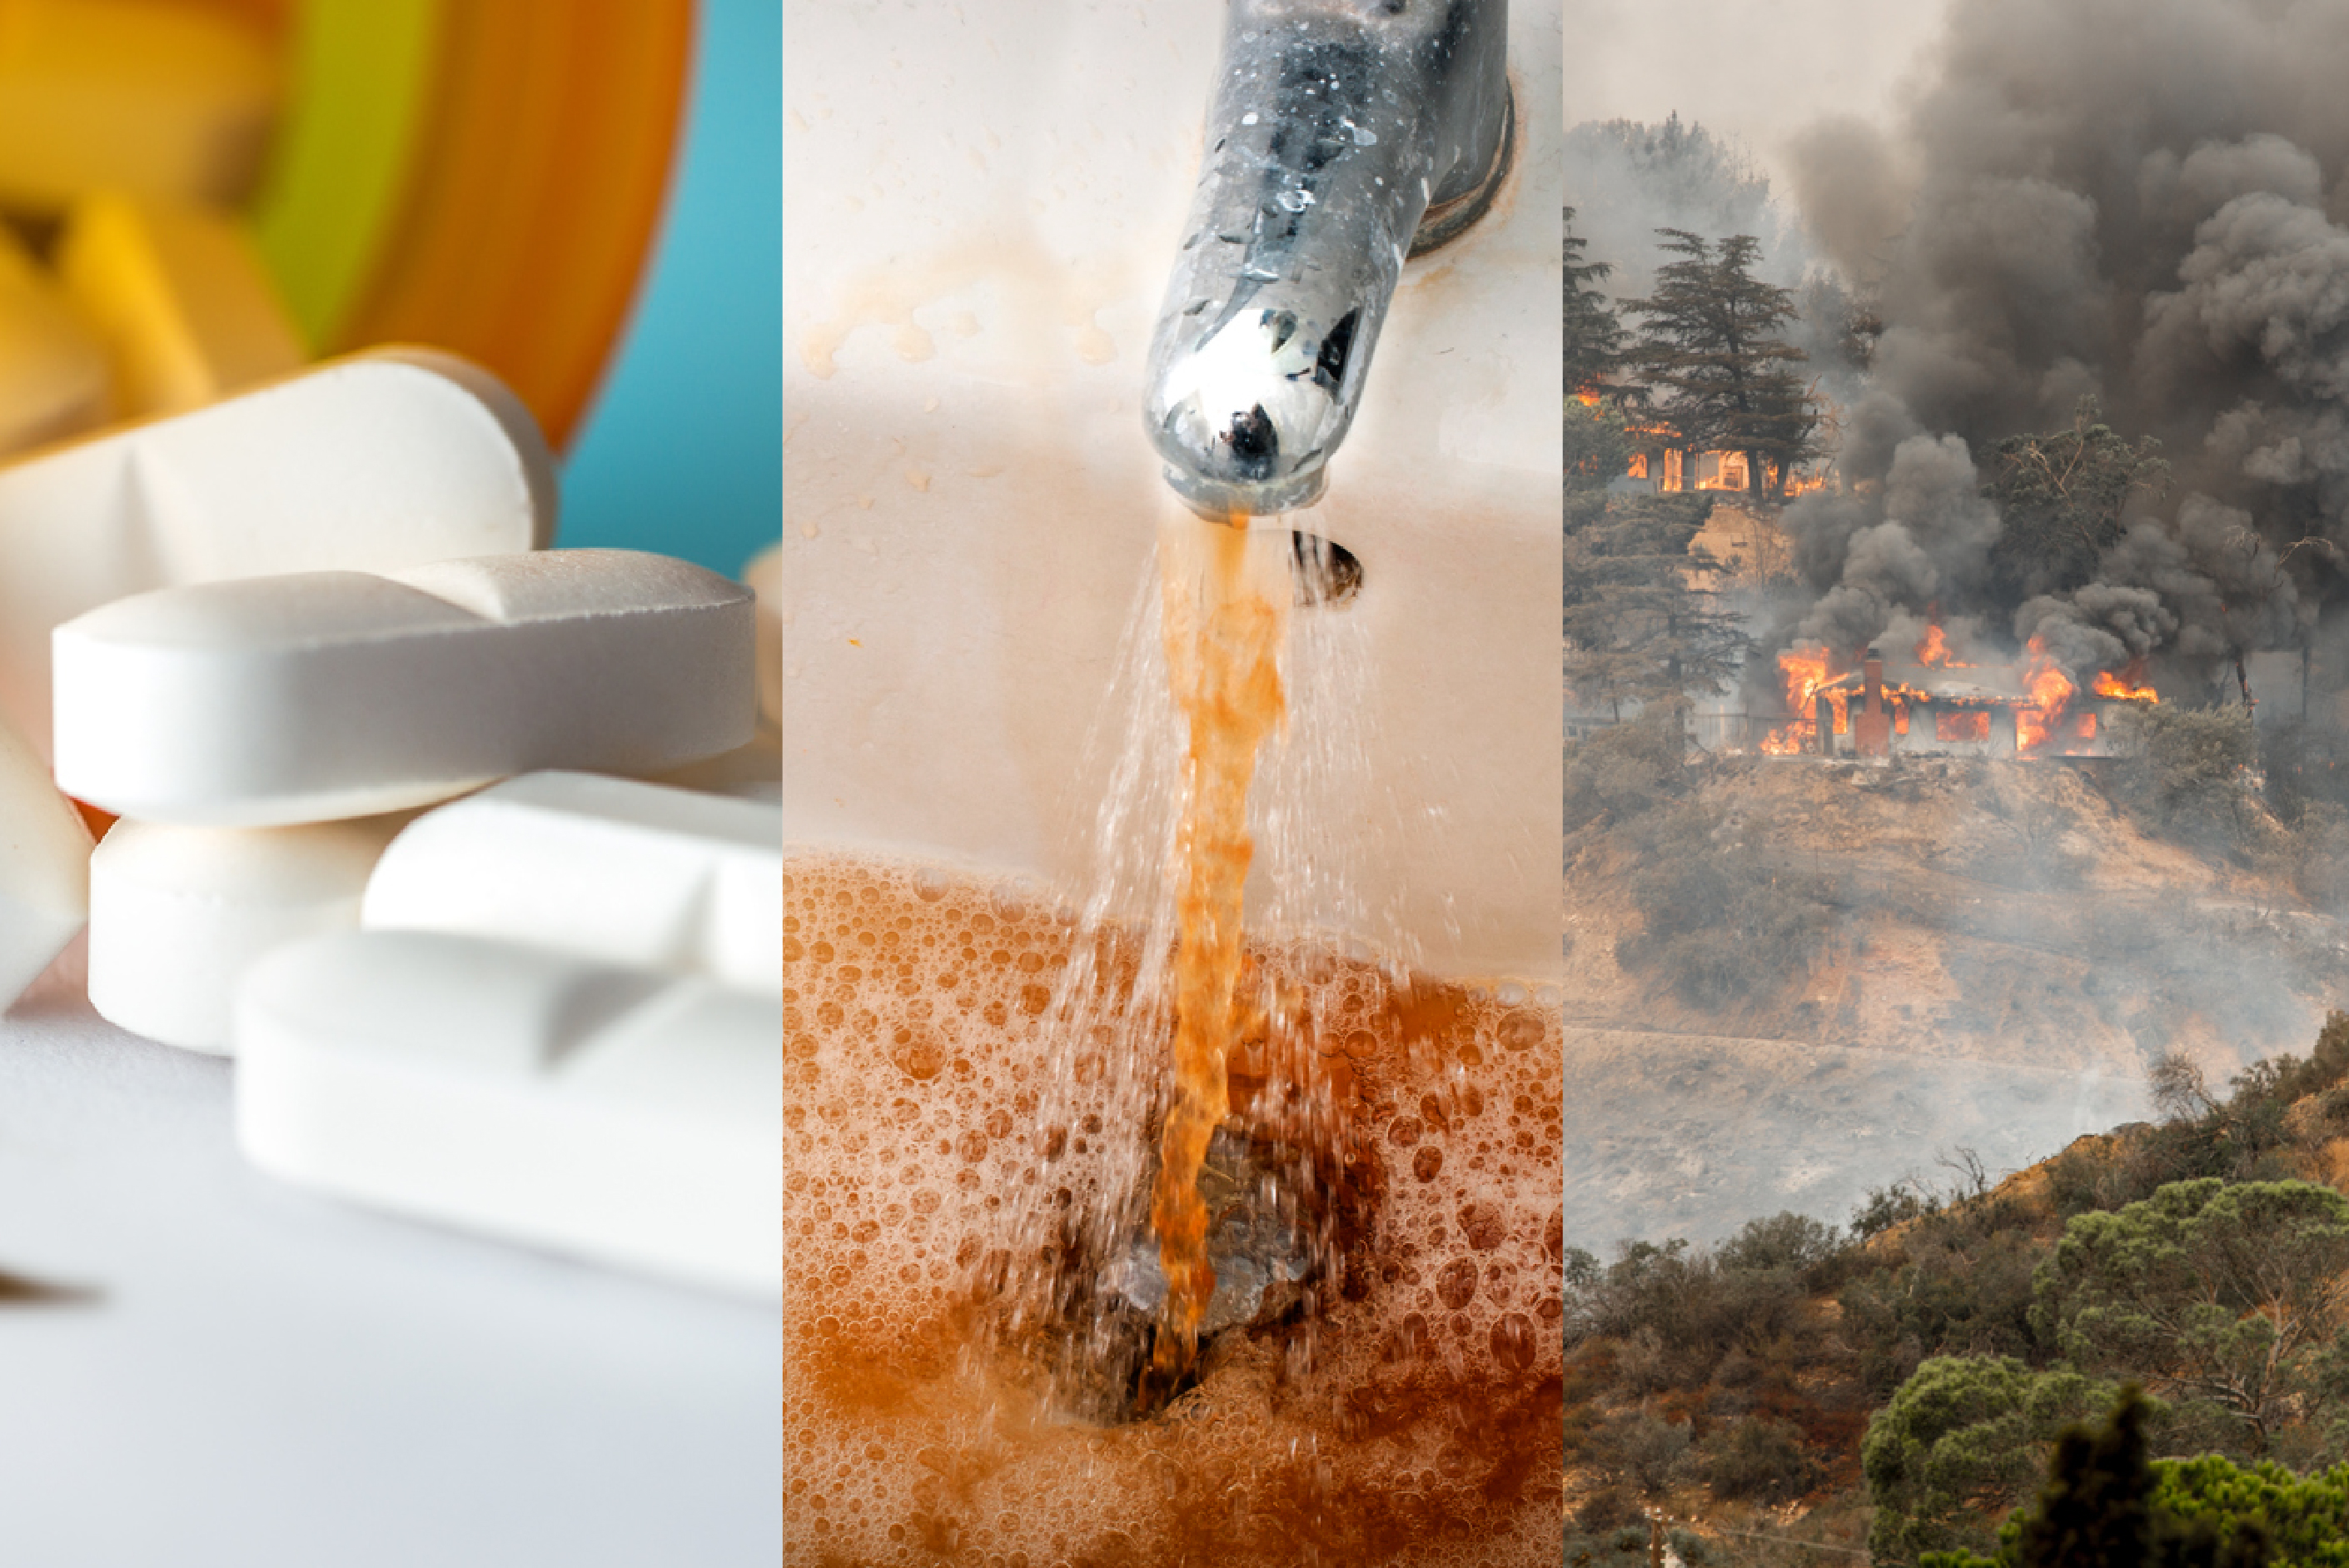 Three panel image consisting of a close-up of pills in the left third, dirty brown water coming out of a faucet in the middle third, and a hillside engulfed in a forest fire in the right third. 